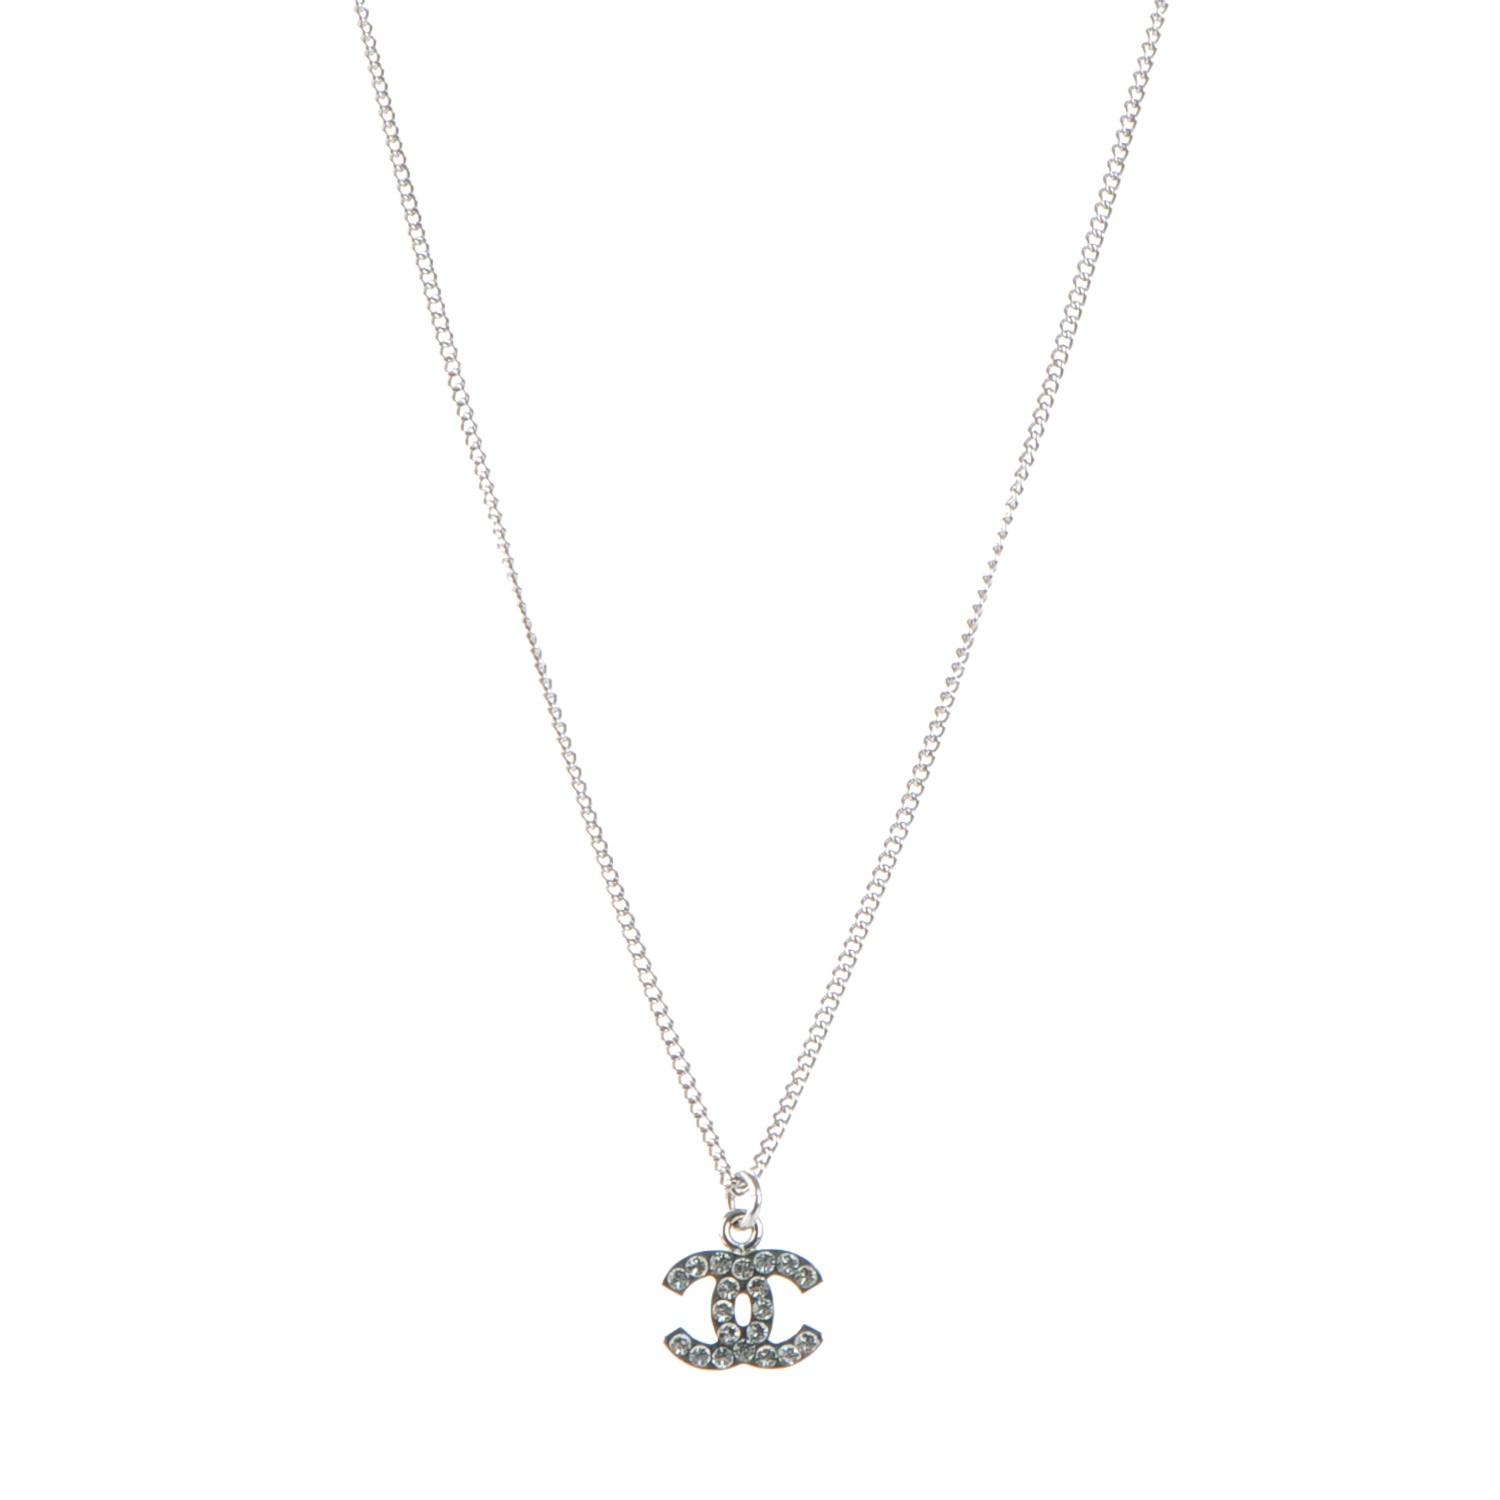 CHANEL Crystal Timeless CC Necklace Silver 163779